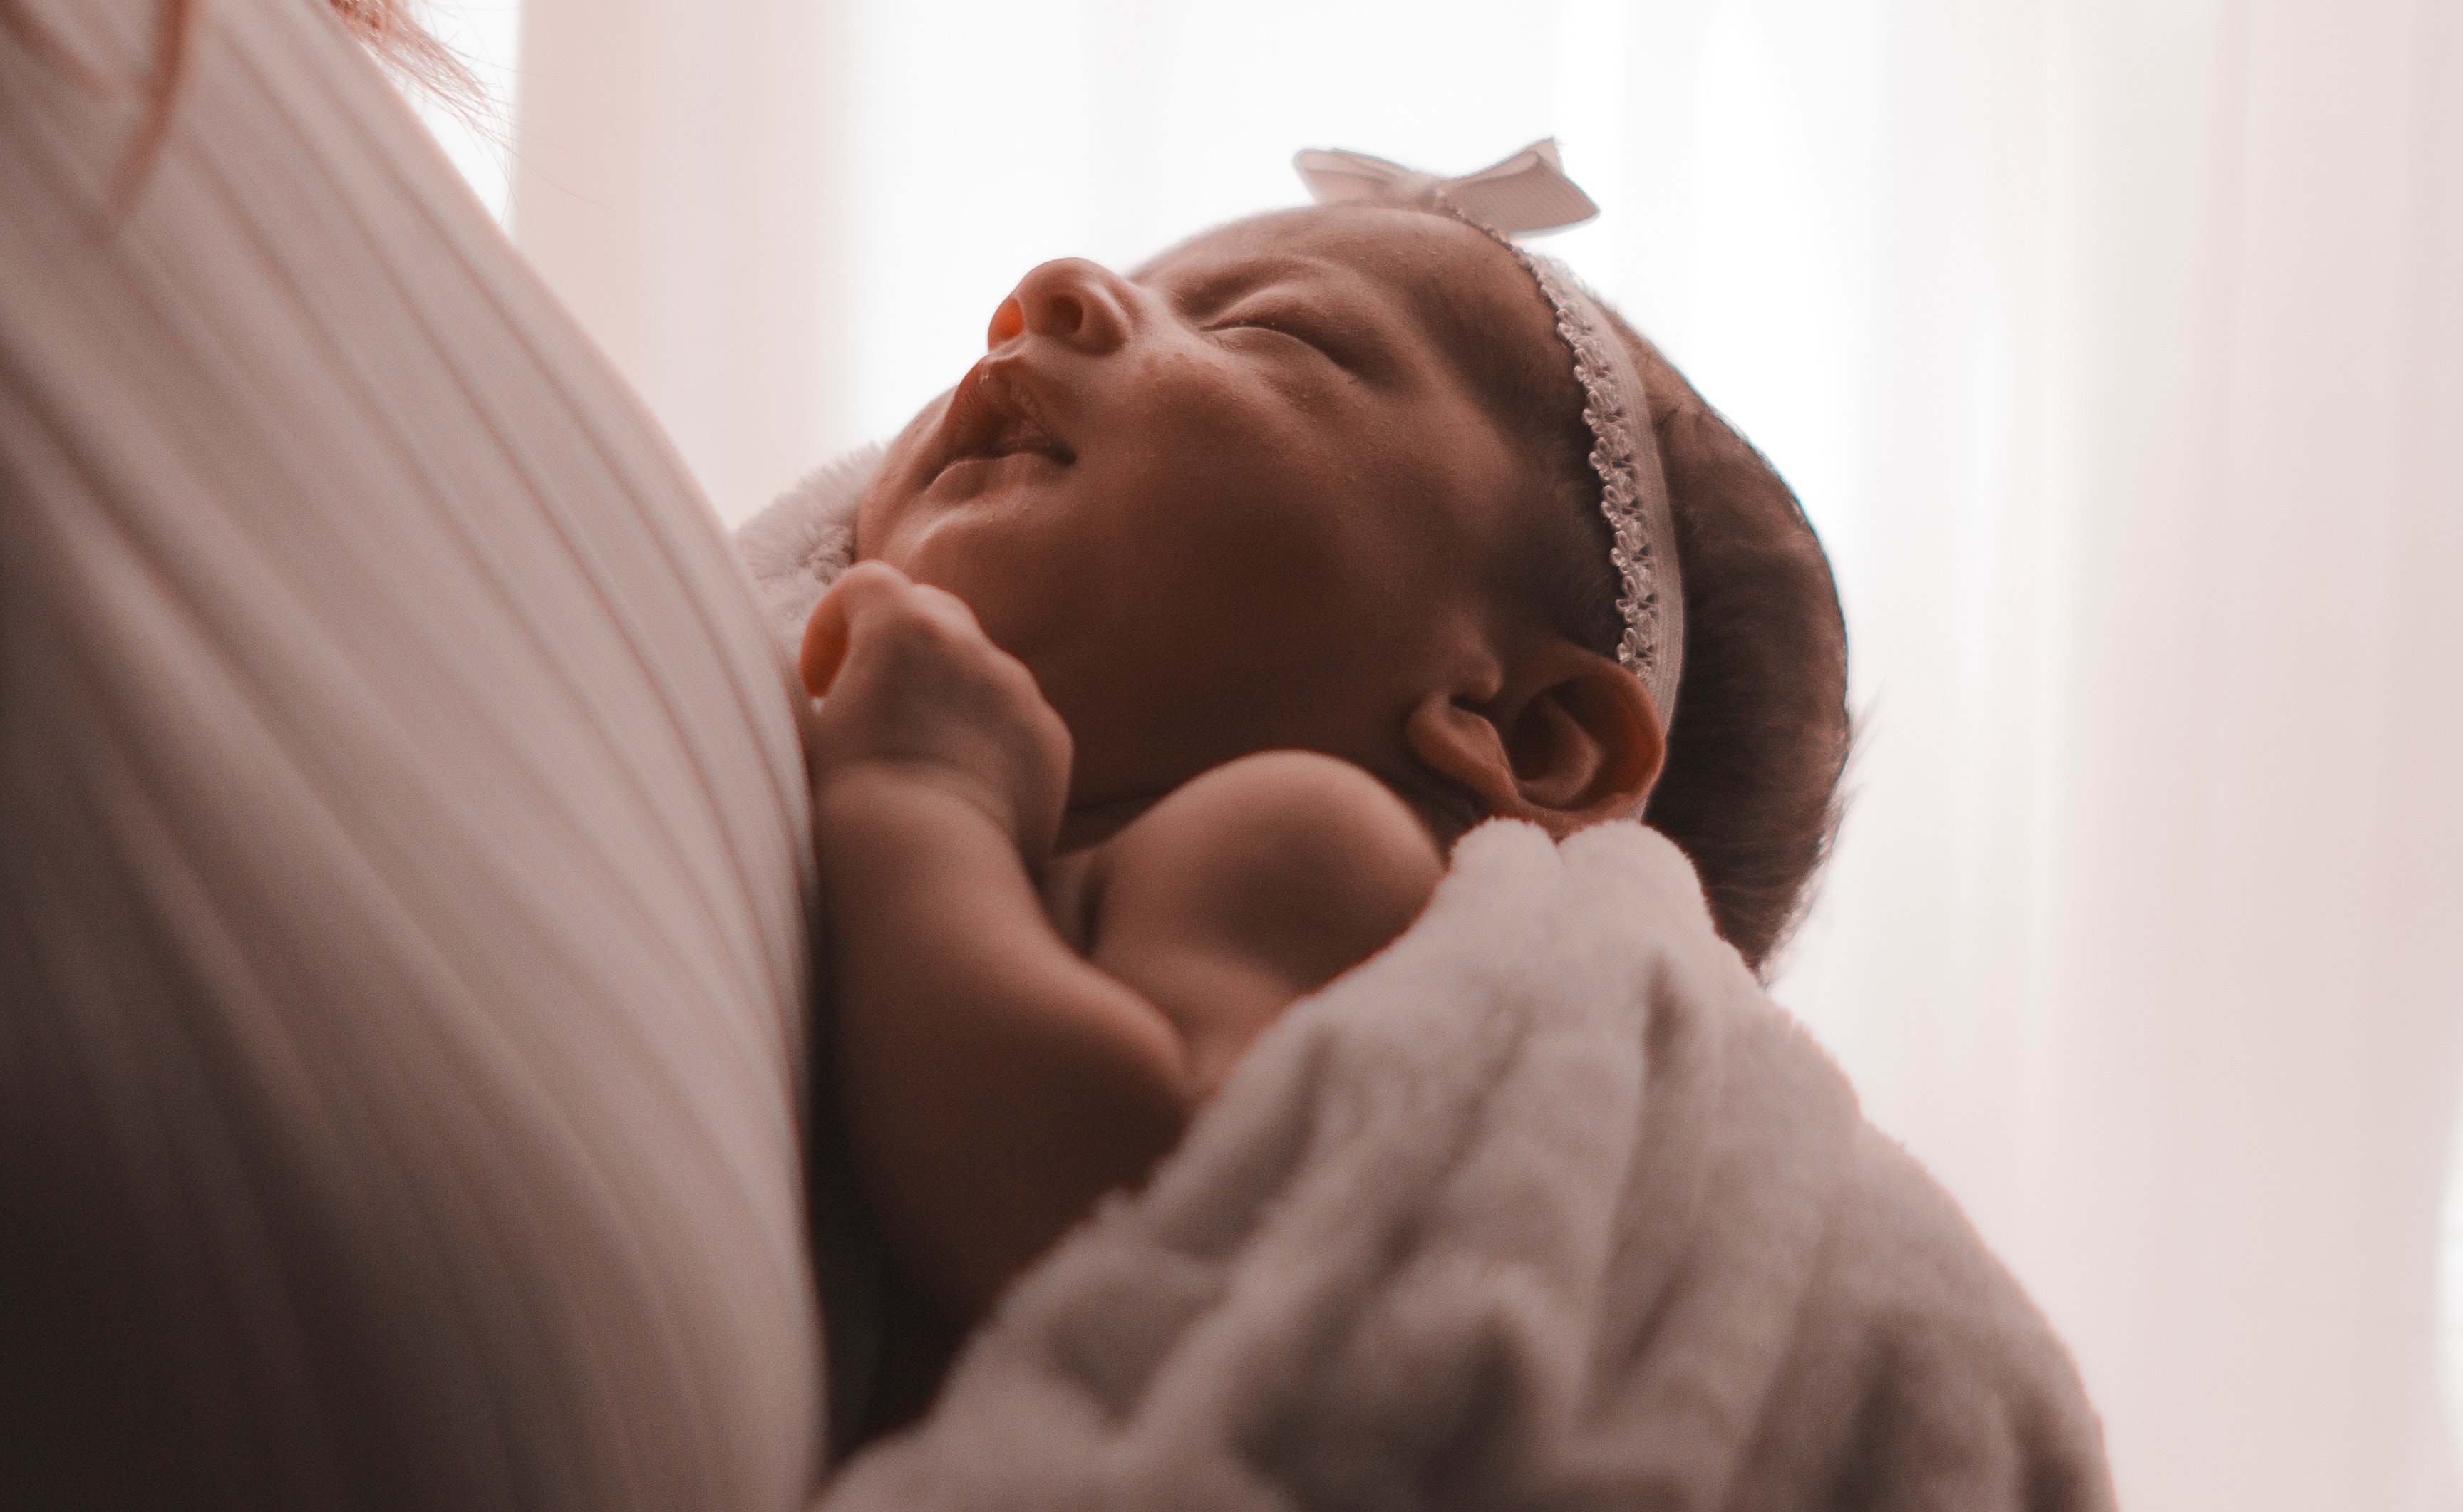 A woman holding a newborn baby girl | Source: Pexels